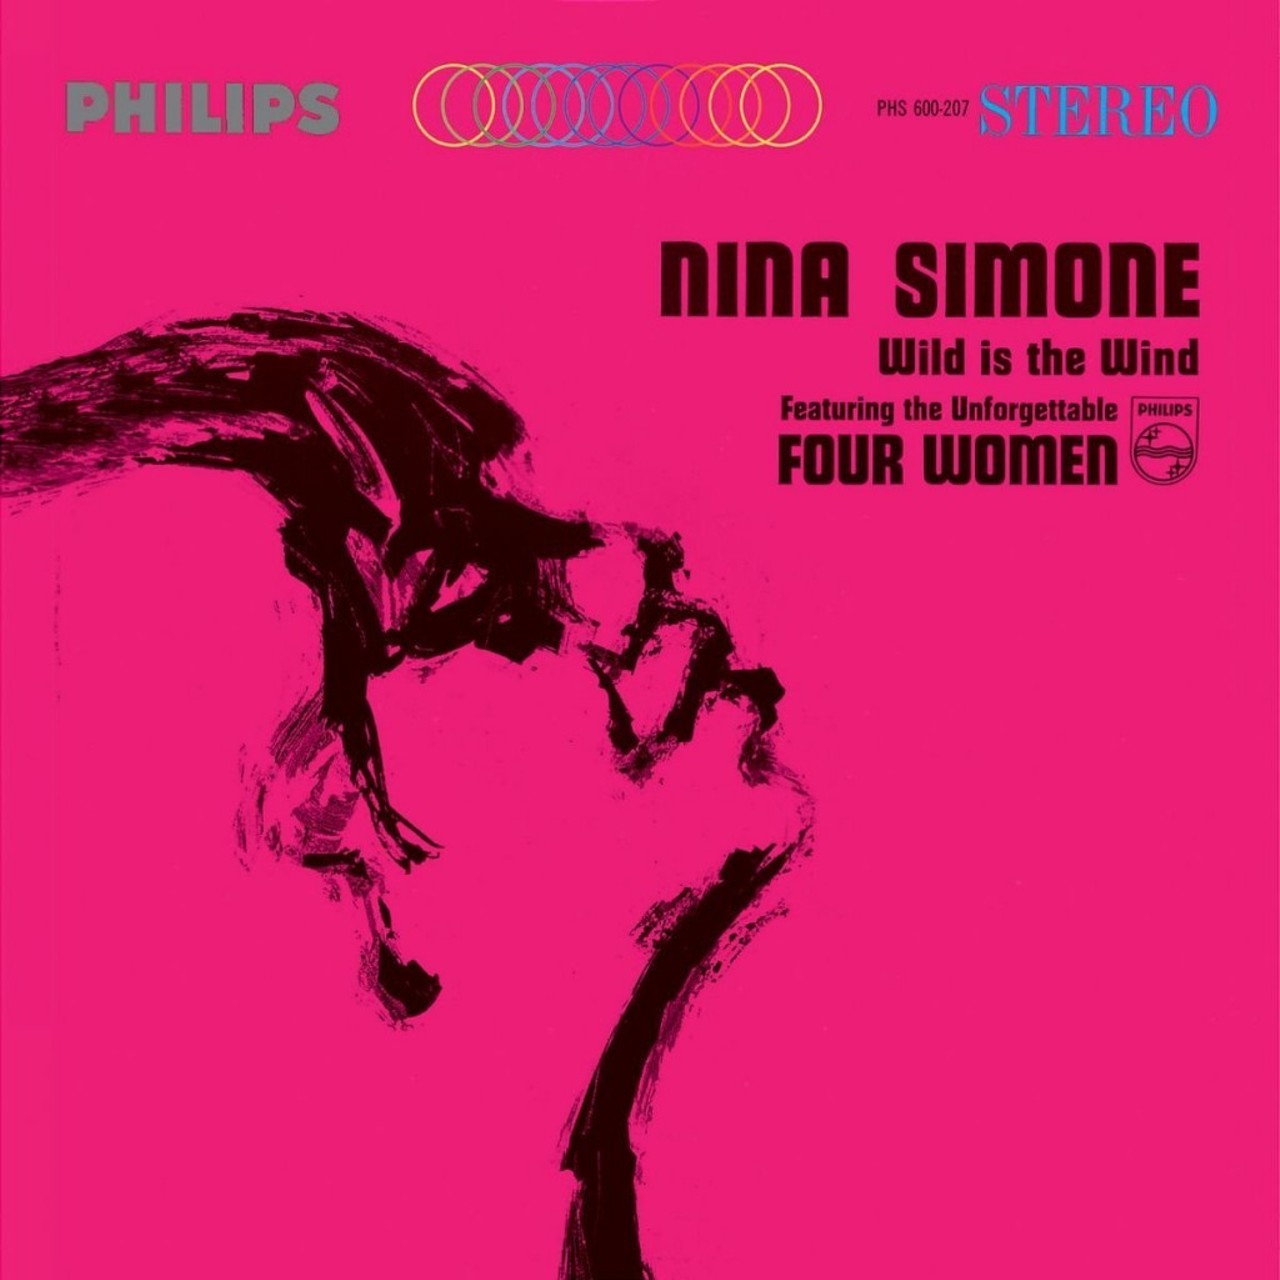 Nina Simone - Wild is the Wind
A perfect record, sublimely intimate and jarring. A perfect introduction to Eunice Waymon, the woman crowned the &#147;High Priestess of Soul.&#148;
Via amazon.com